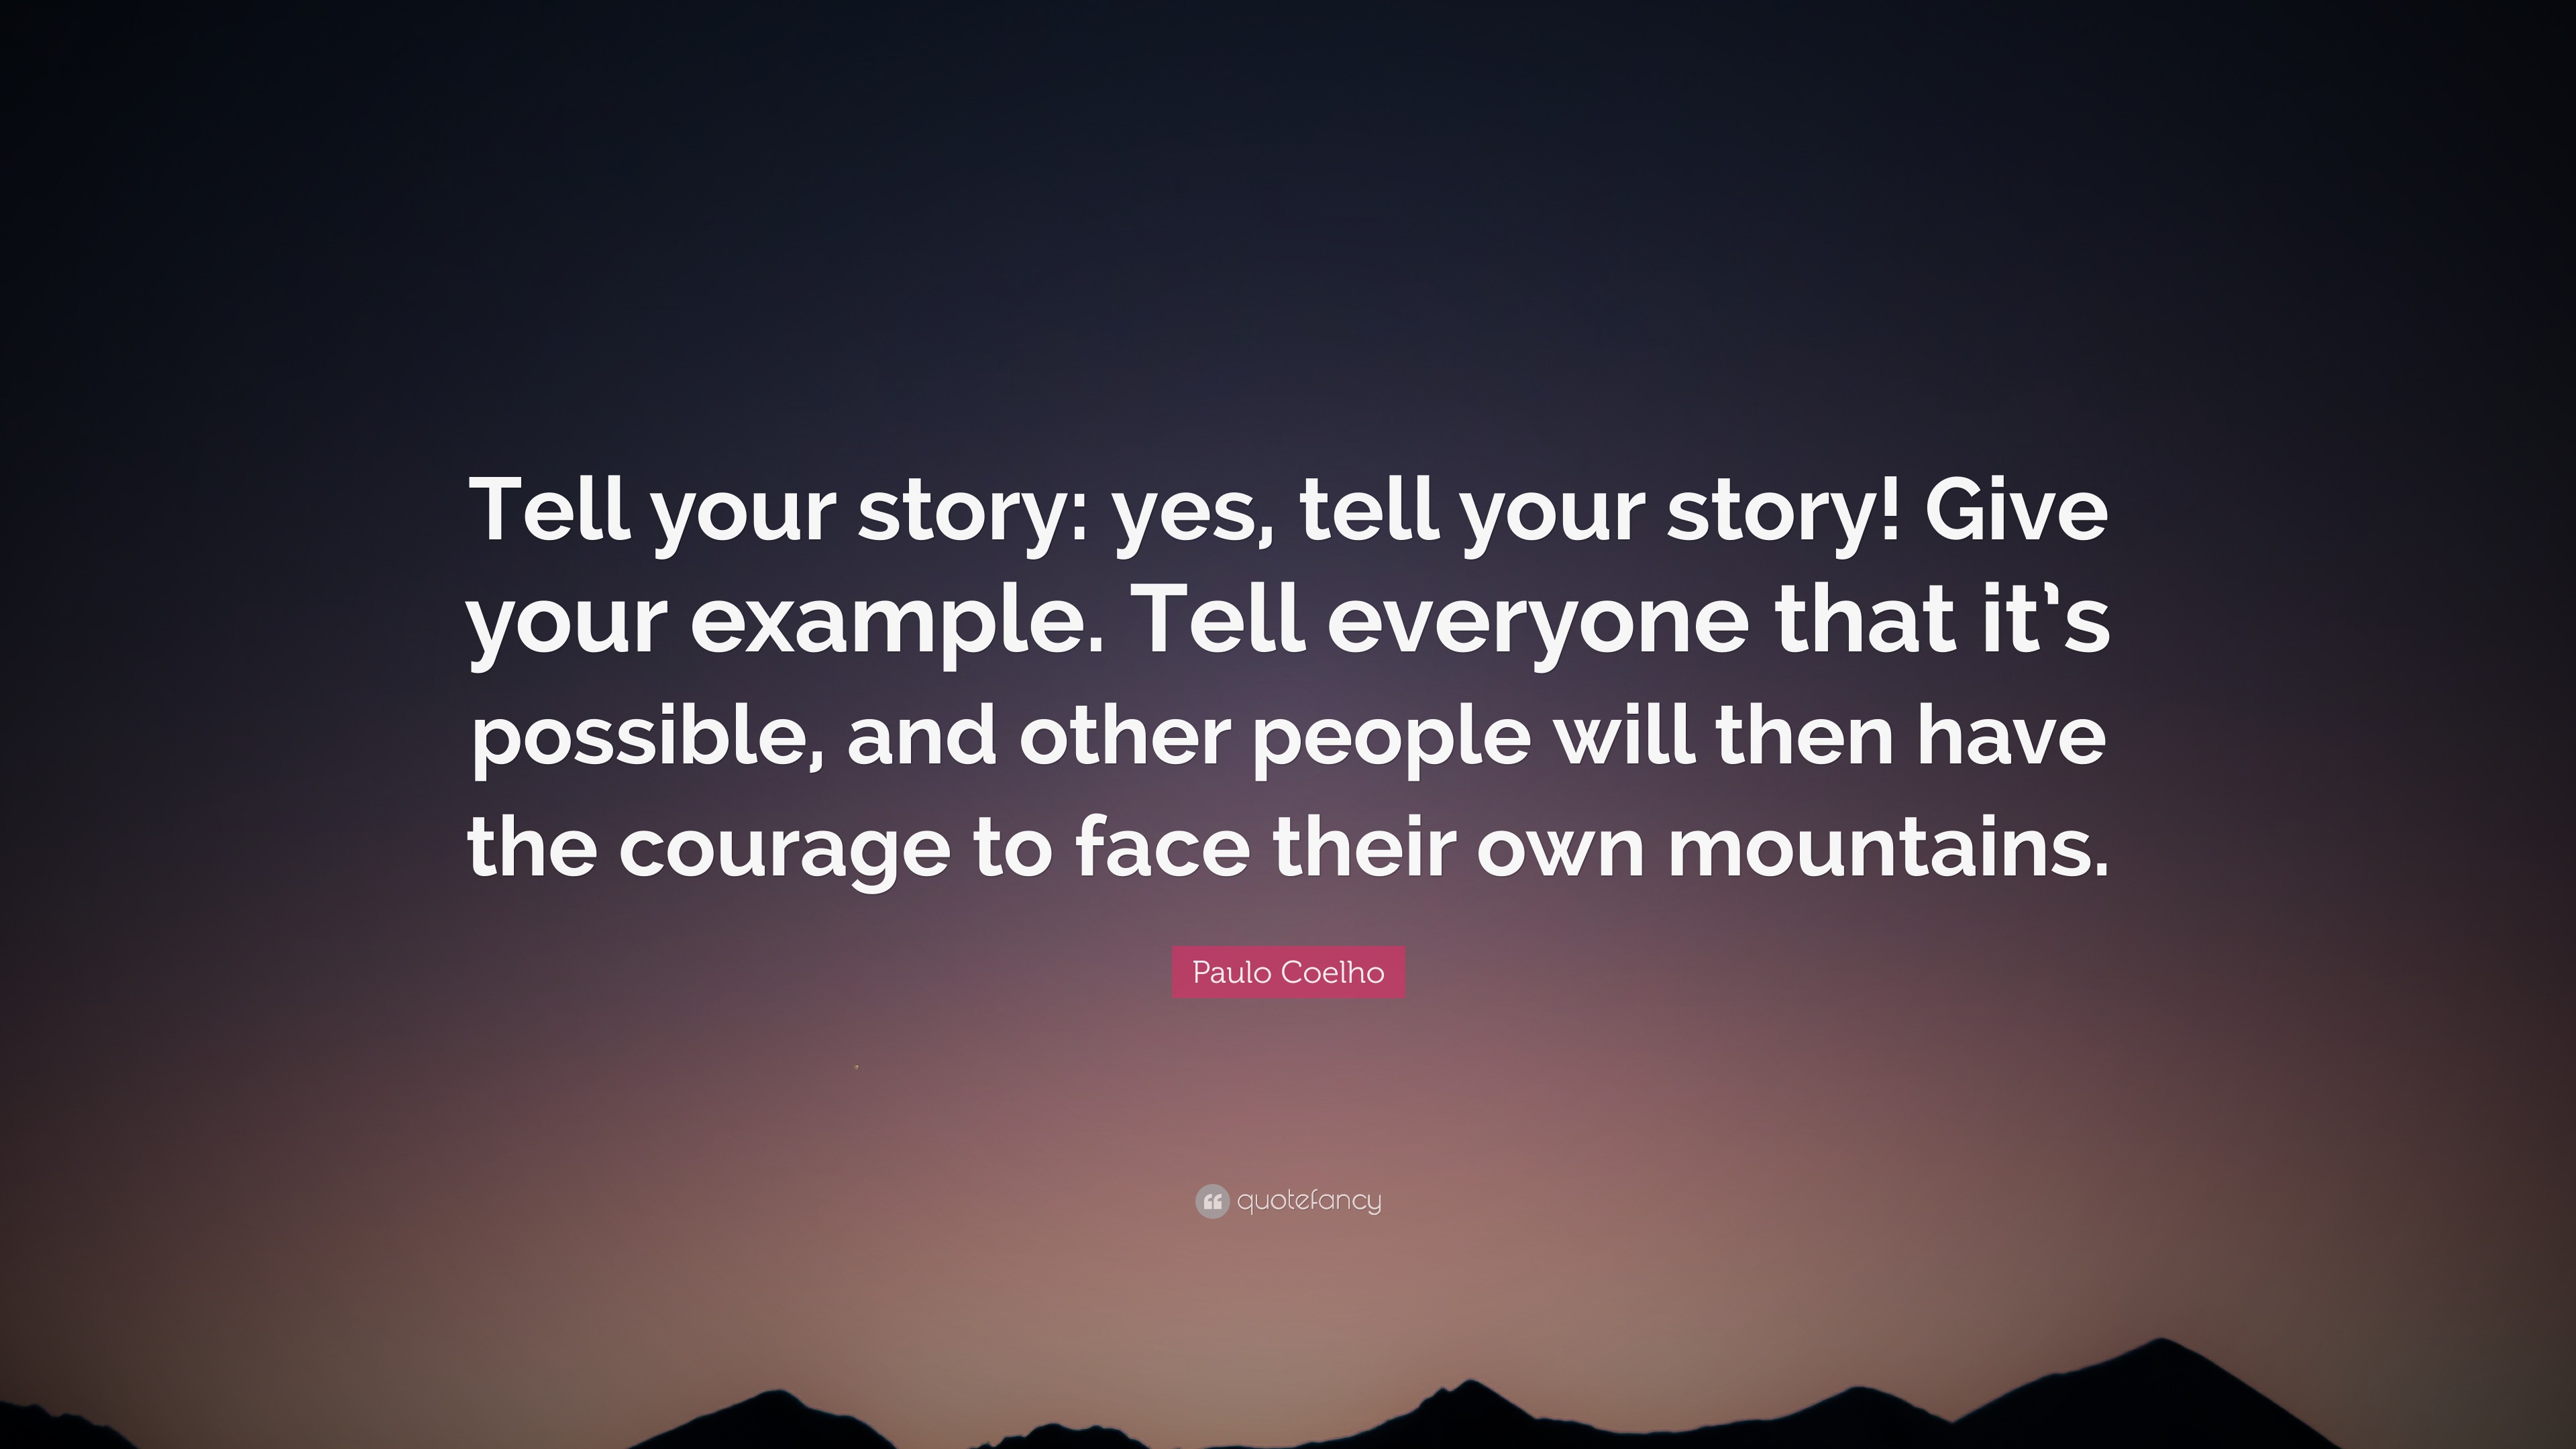 Paulo Coelho Quote Tell Your Story Yes Tell Your Story Give Your Example Tell Everyone That It S Possible And Other People Will Then H